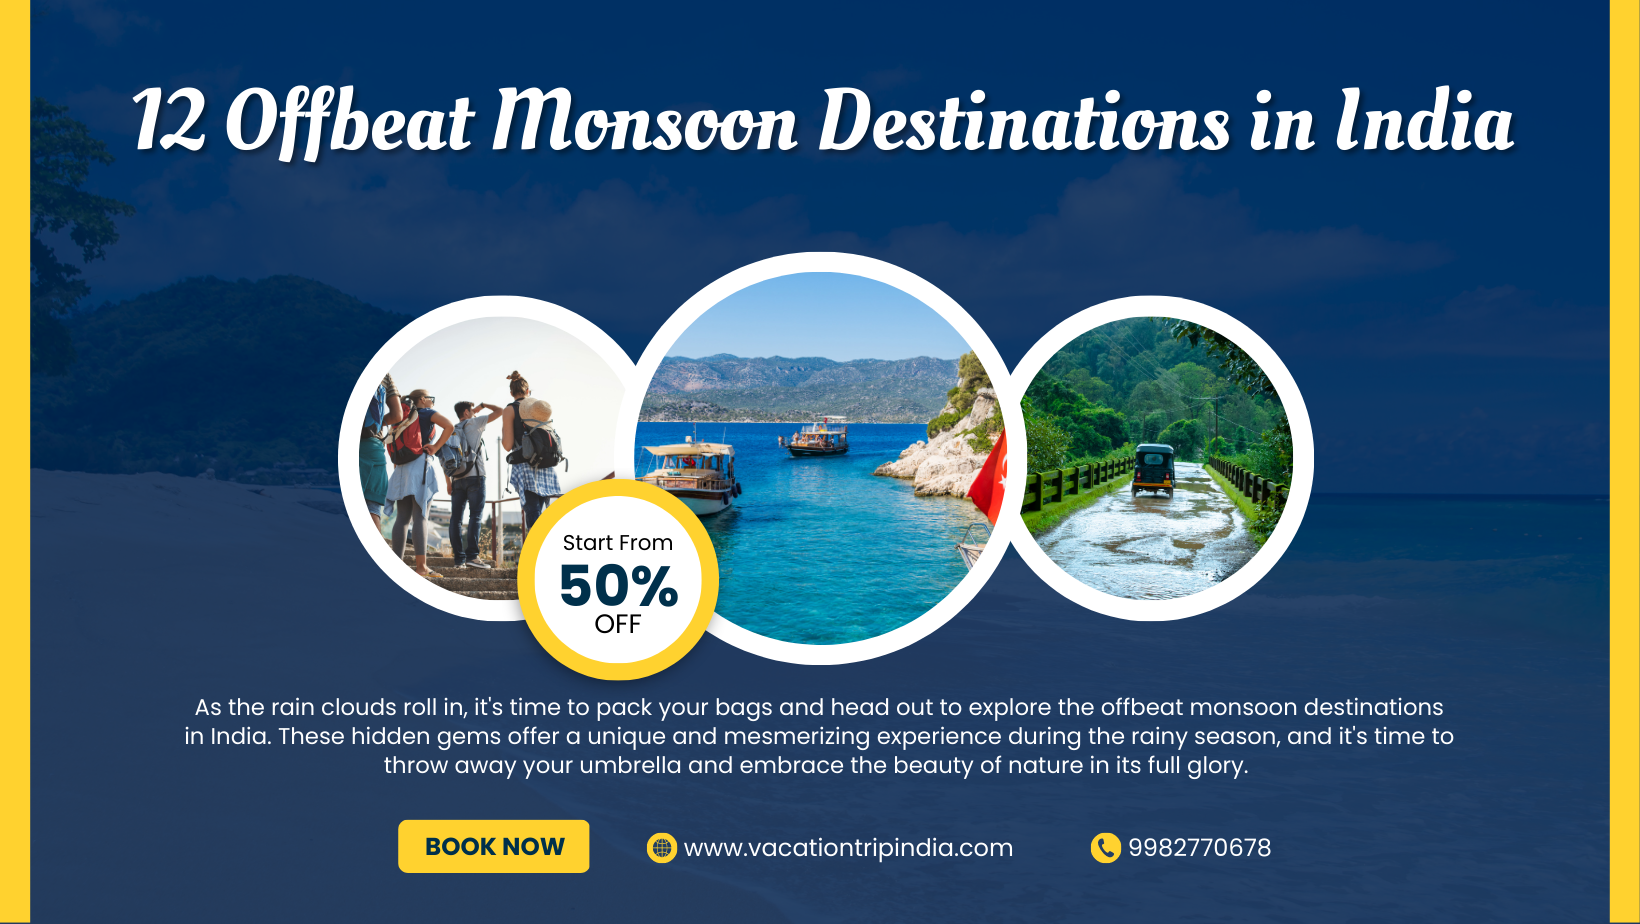 12 Offbeat Monsoon Destinations in India